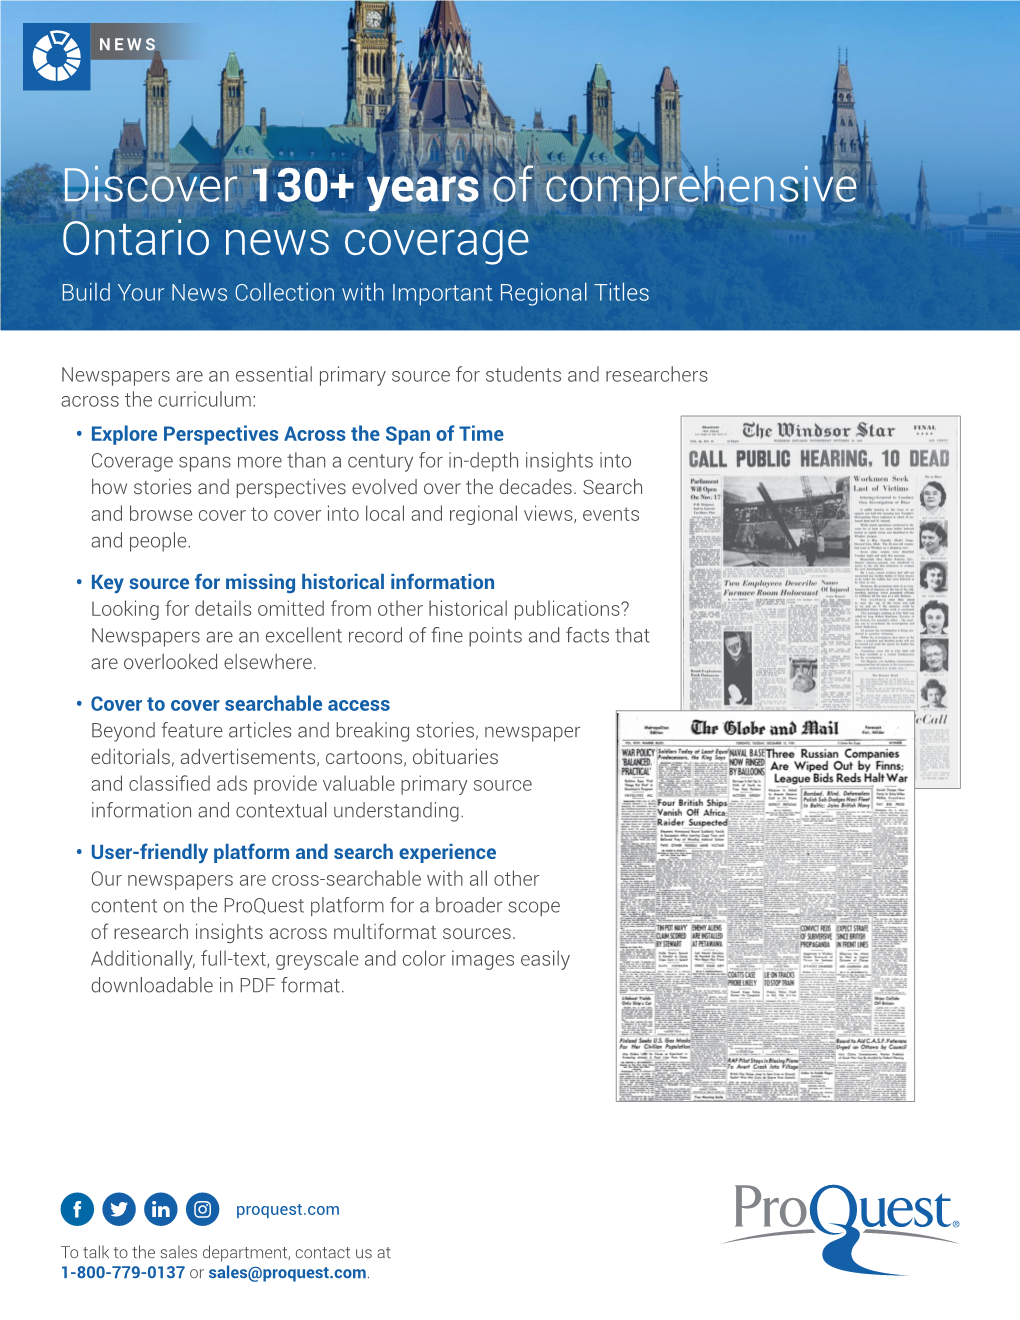 Discover 130+ Years of Comprehensive Ontario News Coverage Build Your News Collection with Important Regional Titles